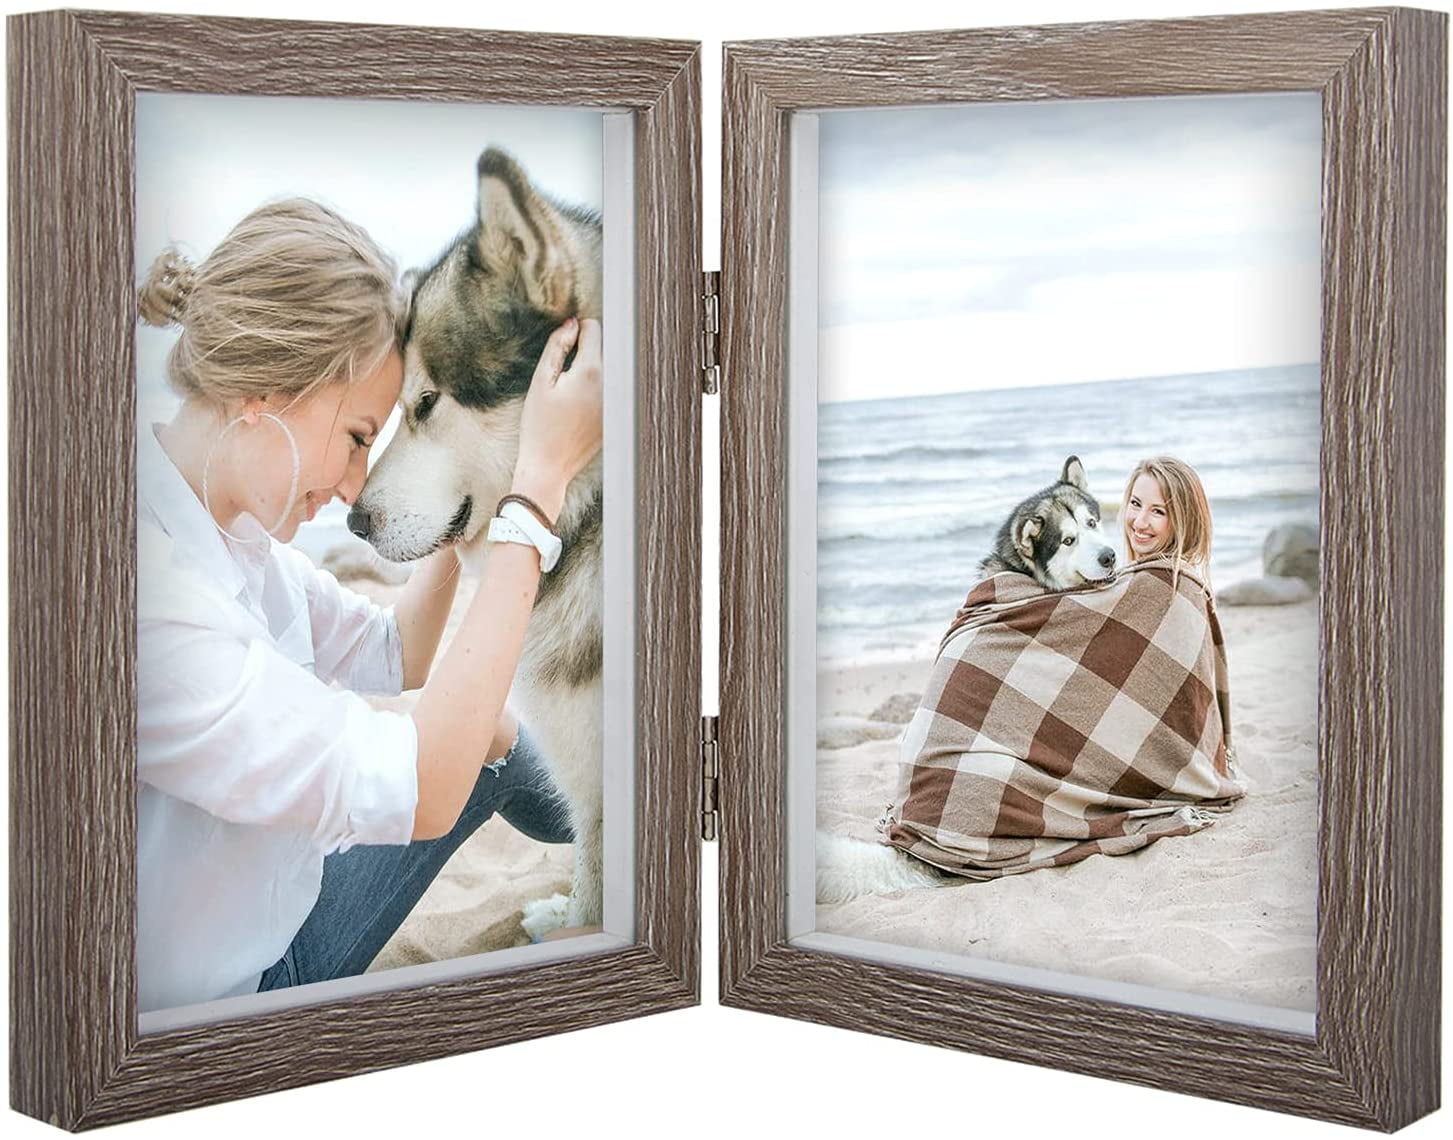 Double Picture Frame 5x7 Vertical Rustic Wooden Hinged Desktop Photo Frames 